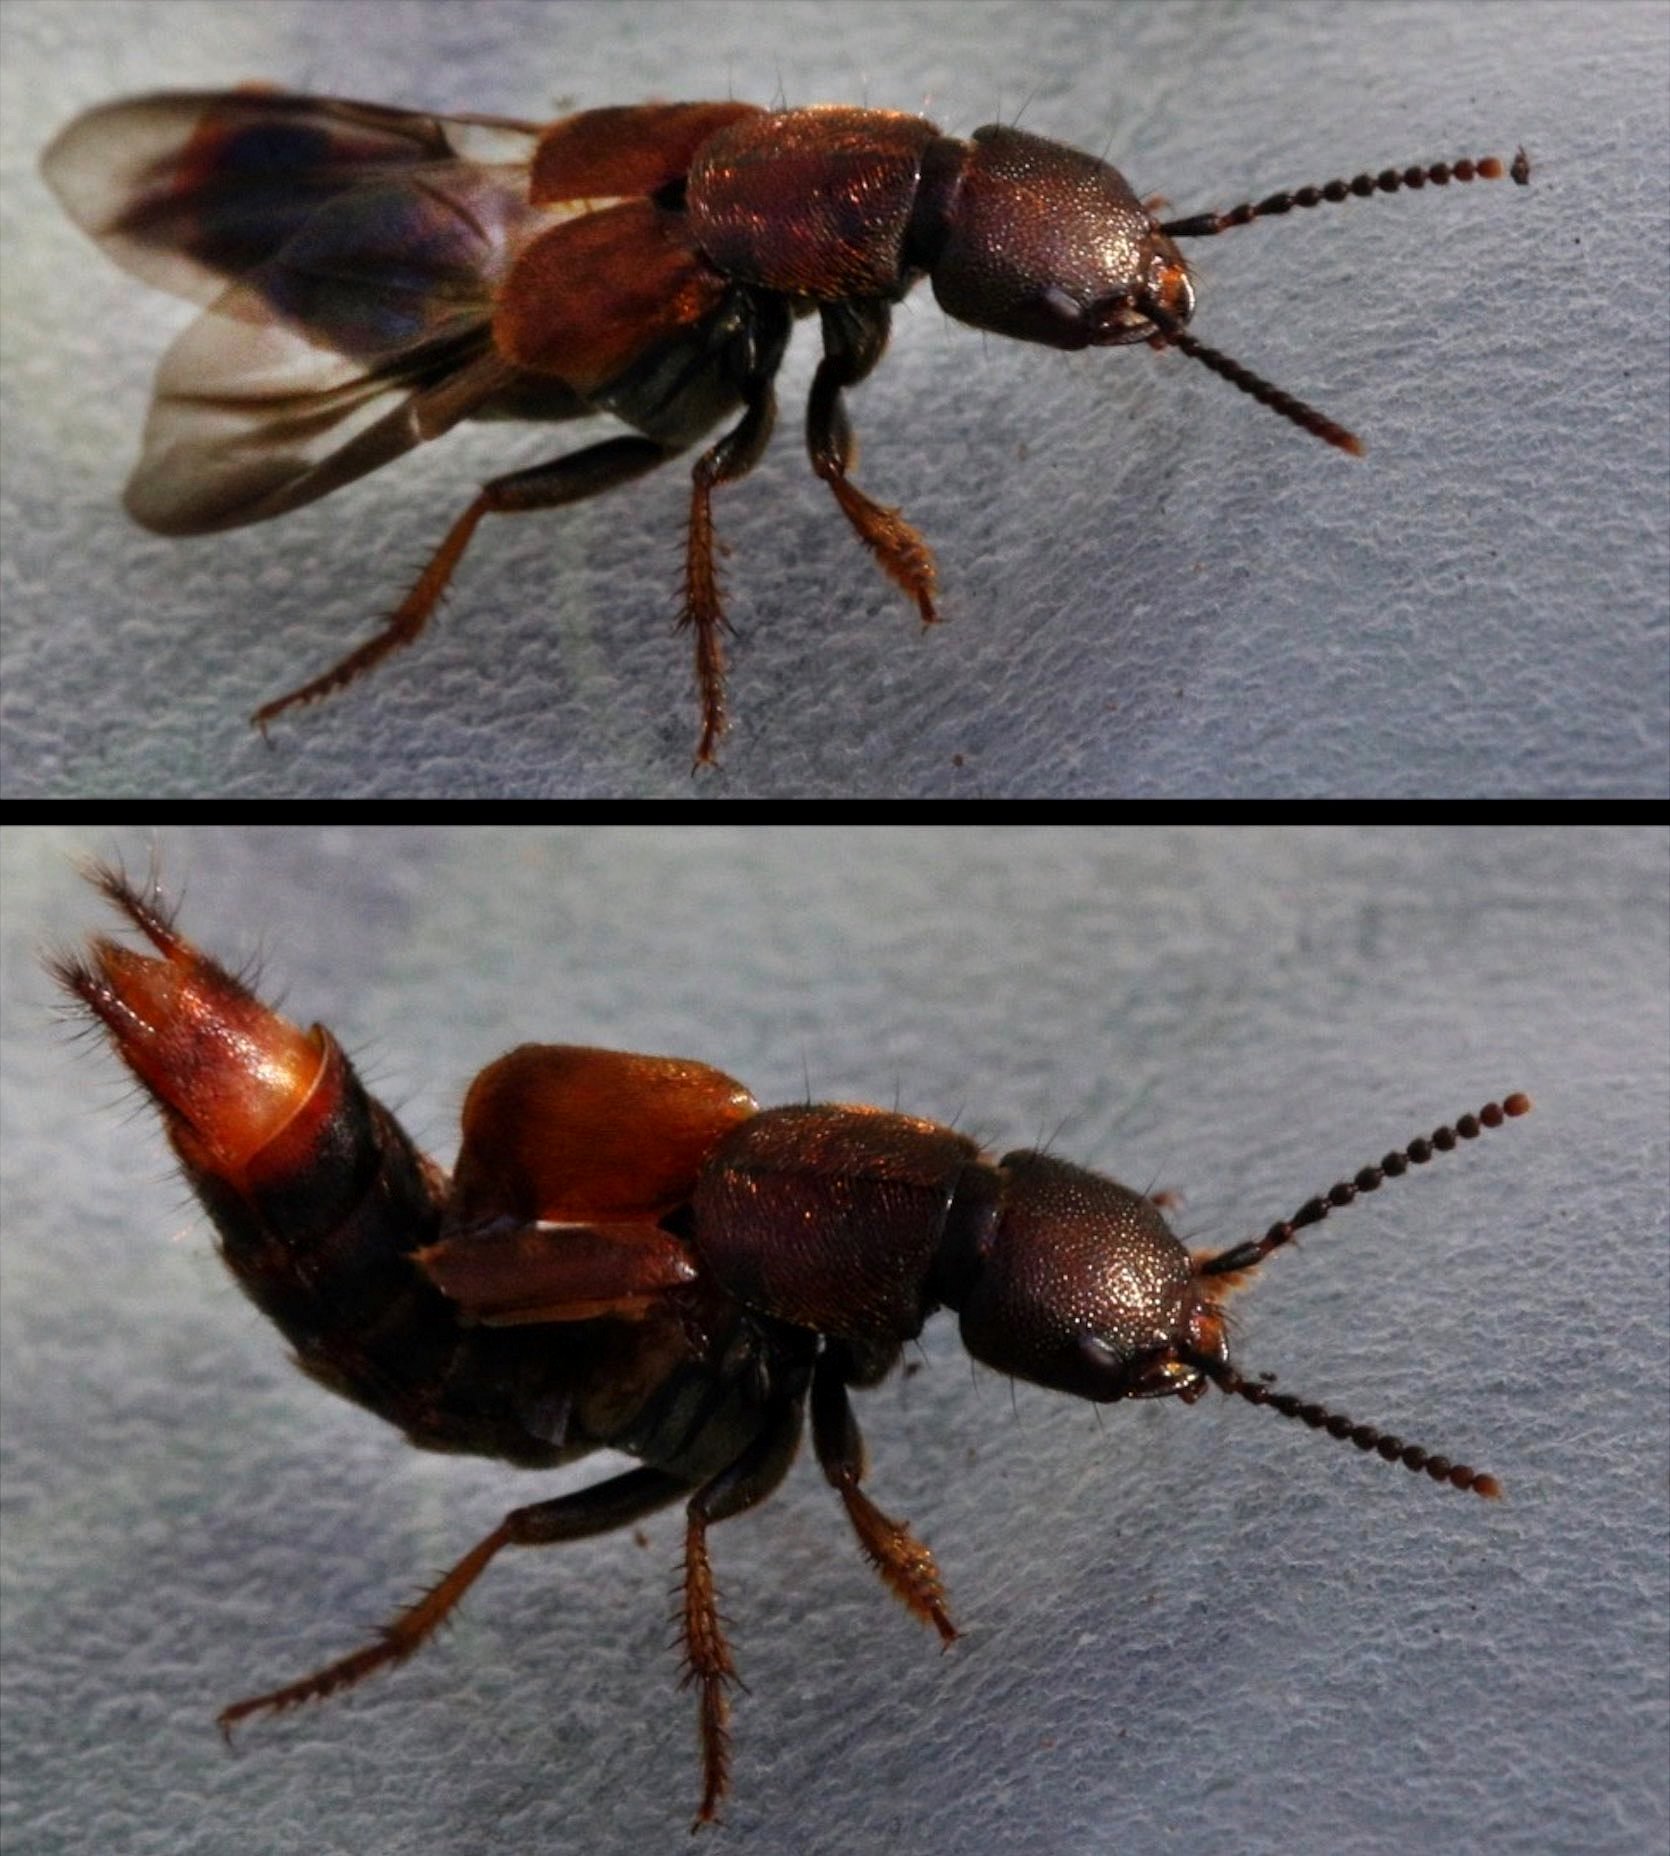 A rove beetle with its wings extended (top) and with its abdomen raised in a similar manner to a scorpion sting (bottom)